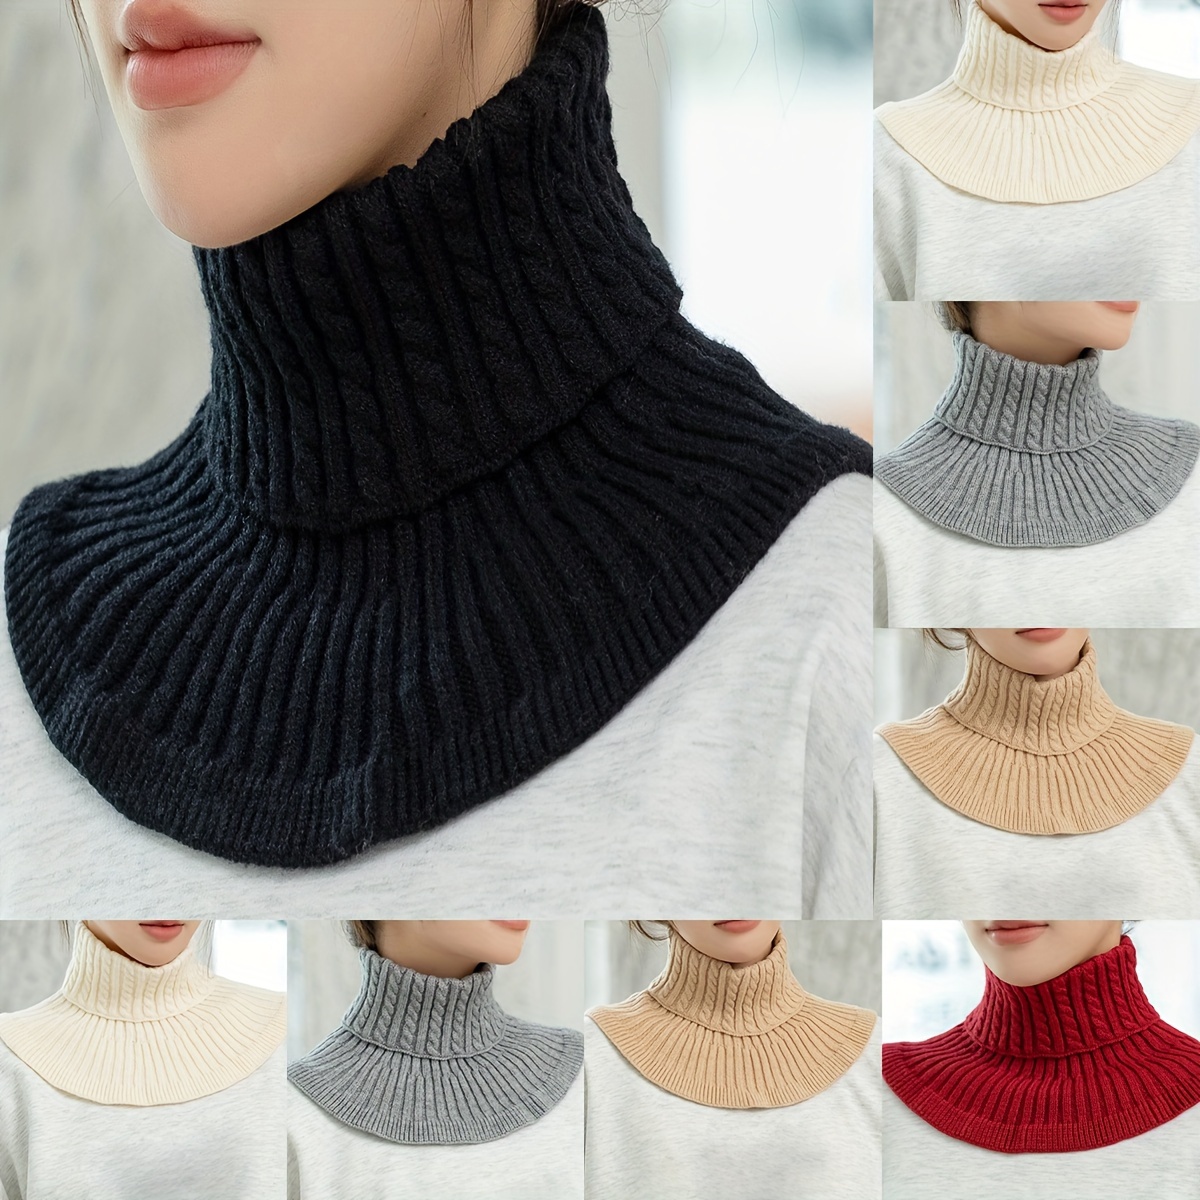 

Elegant Turtleneck Twist Knit Neck Gaiter Simple Solid Color Fake Collar Infinity Scarf Autumn Winter Coldproof Versatile Neck Cover